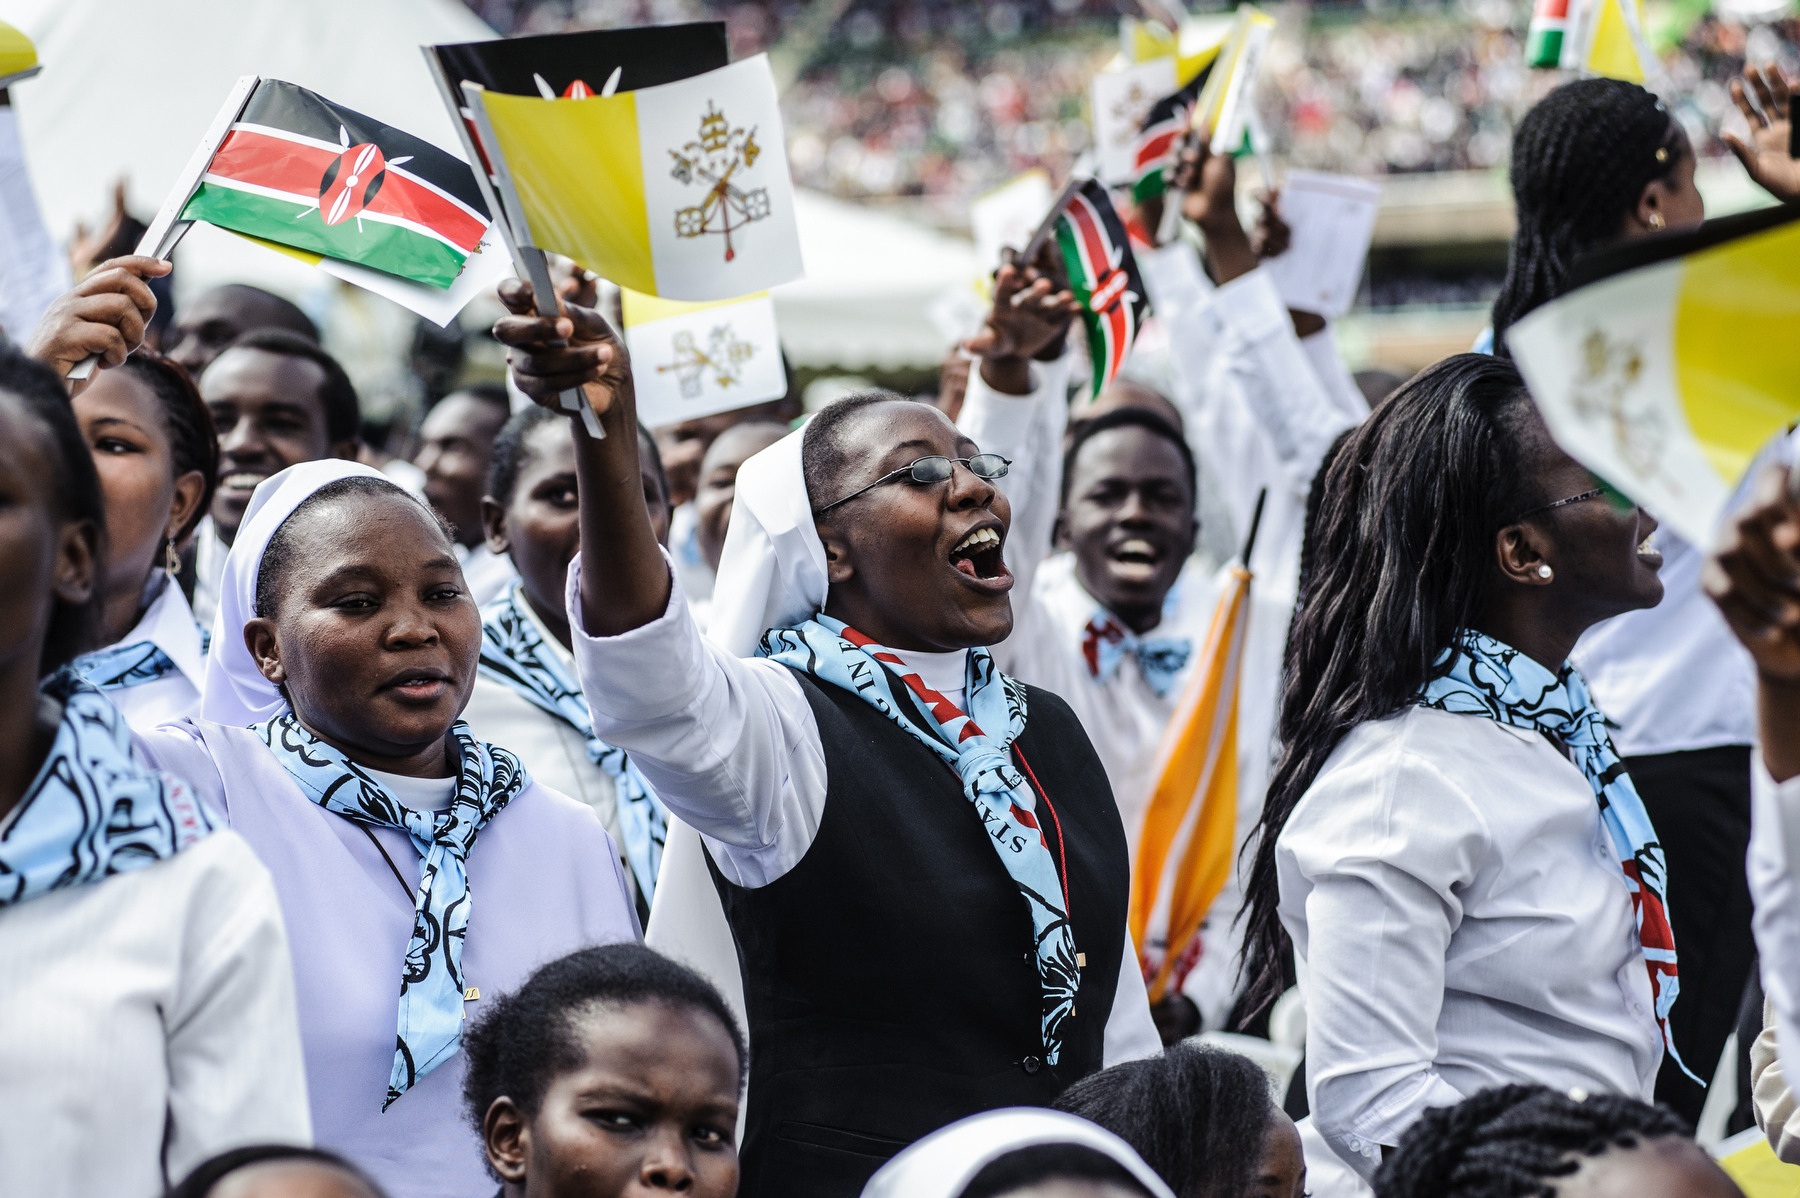  
Kenyan youth wave flags and cheer the arrival of Pope Francis at Kasarani stadium in Nairobi on 27 November 2015. The Pope spoke on the themes of tribalism, radicalization and corruption. Pope Francis is on a five-day visit to Kenya, Uganda and Cen